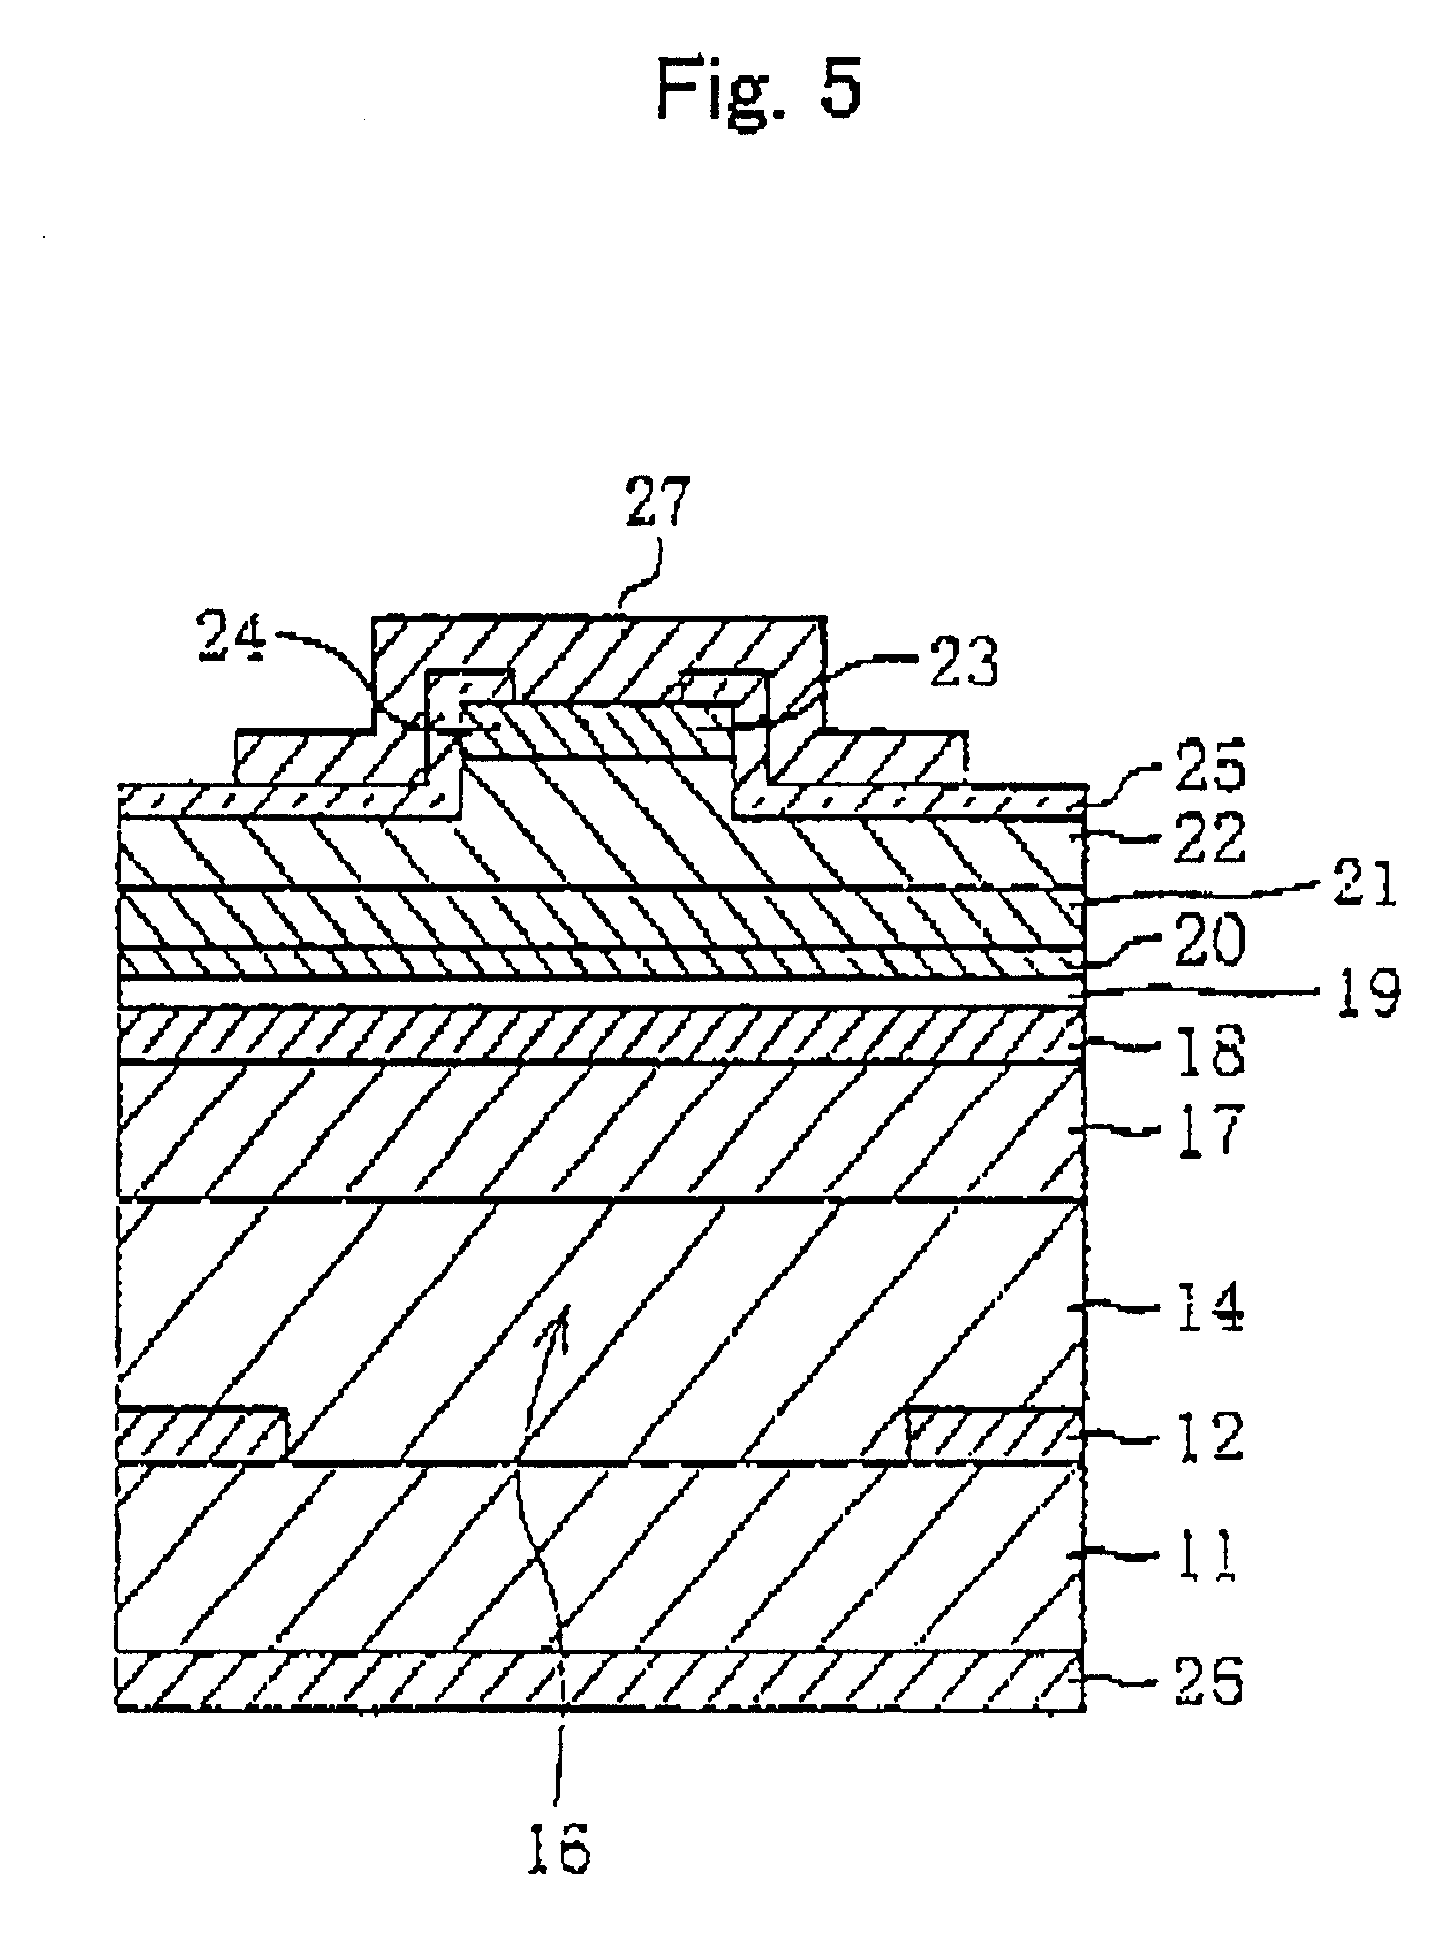 Semiconductor laser, semiconductor device, and their manufacture methods